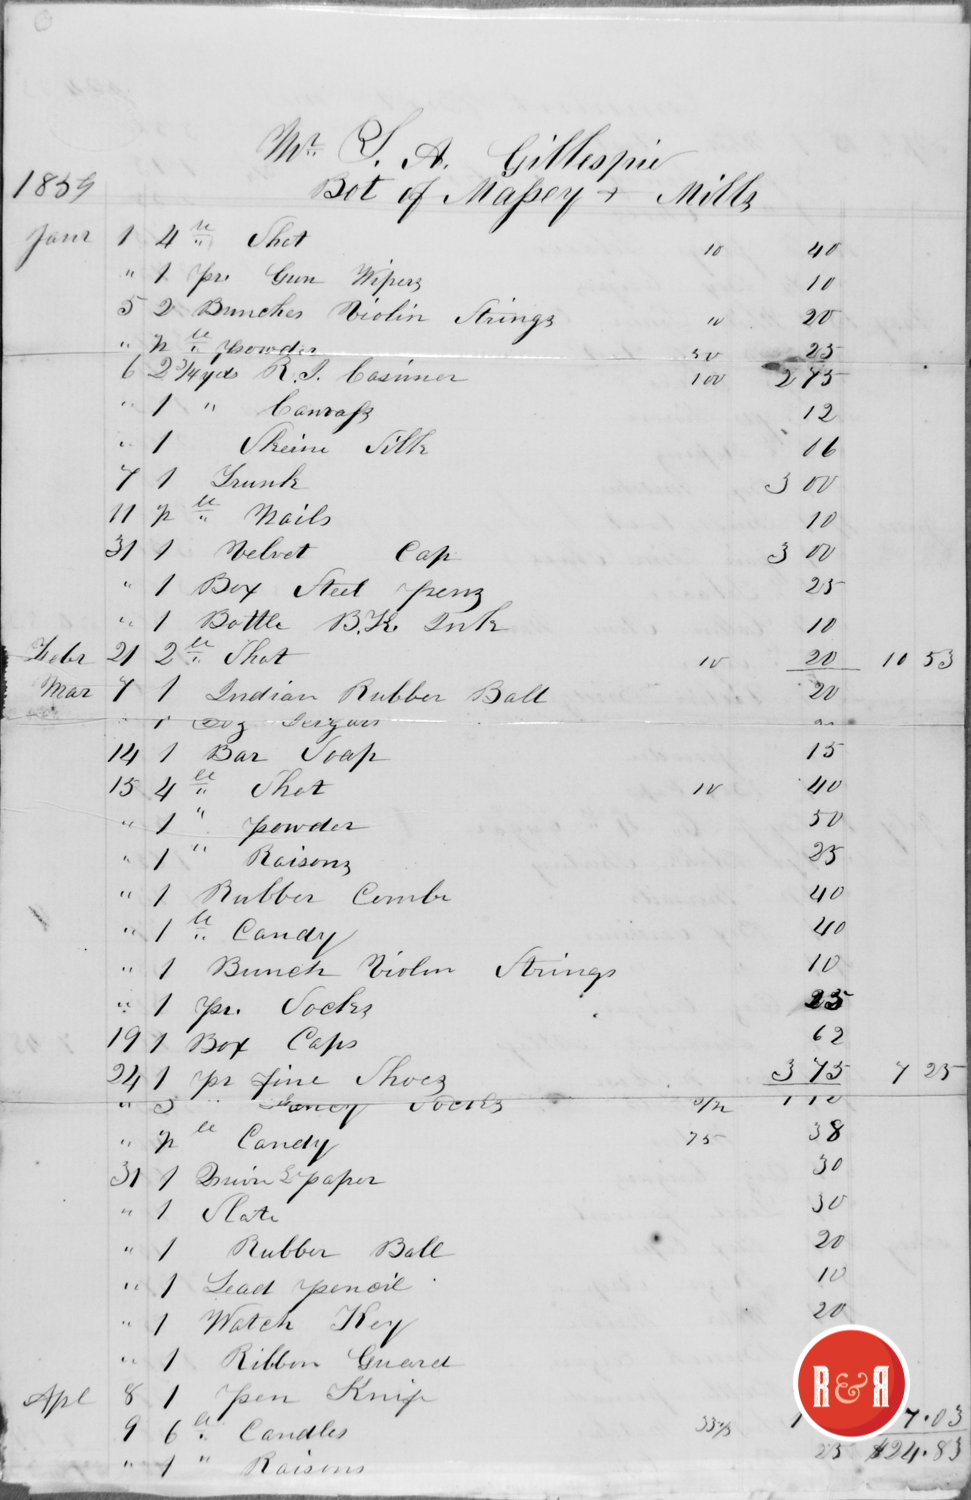 LEDGER FROM MASSEY AND MOORE - 1850s